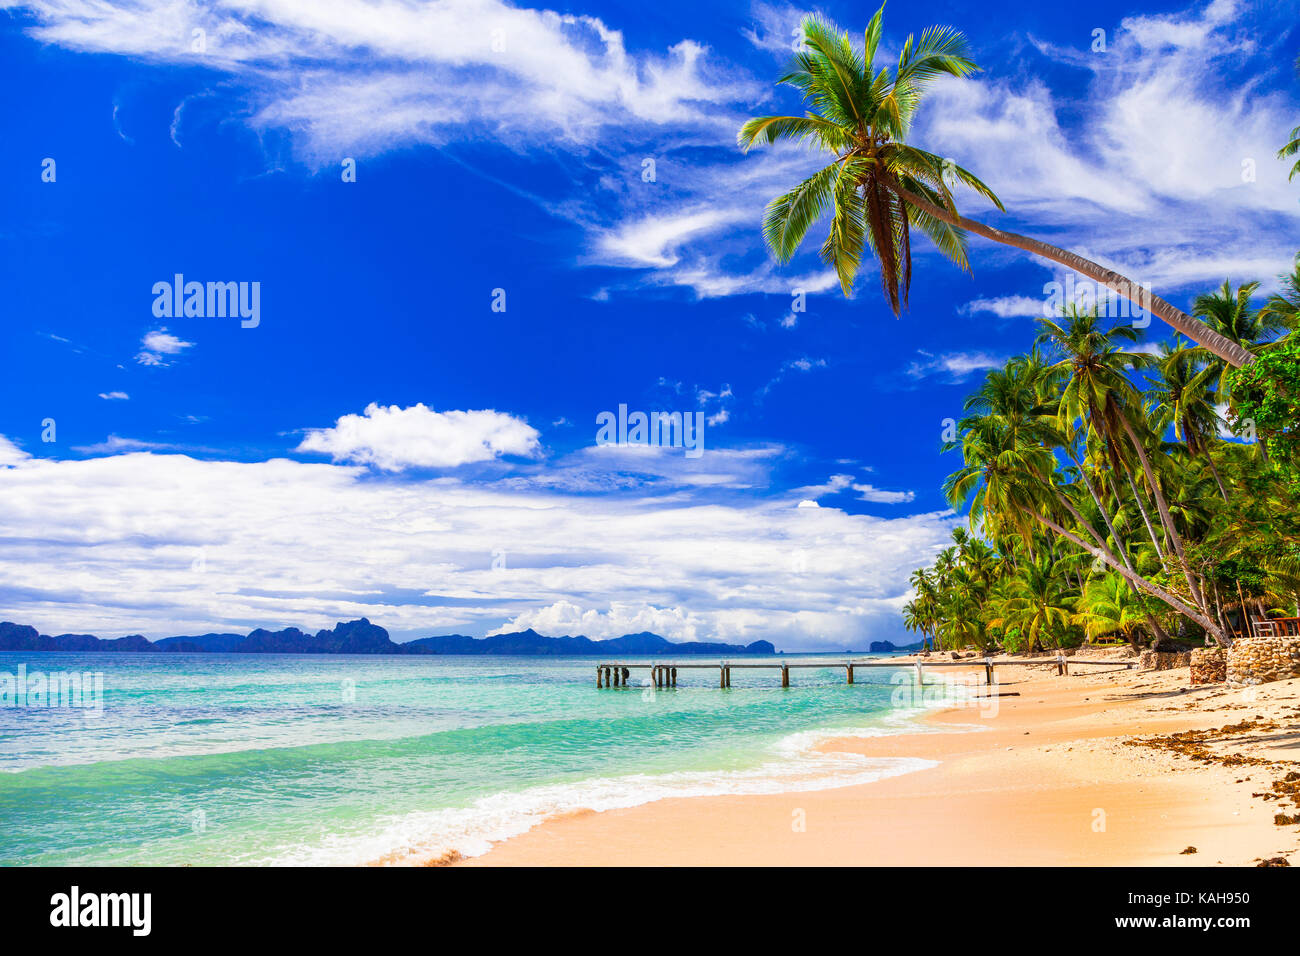 unique unspoiled nature and tropical paradise El nido in Plawan. Philippines Stock Photo